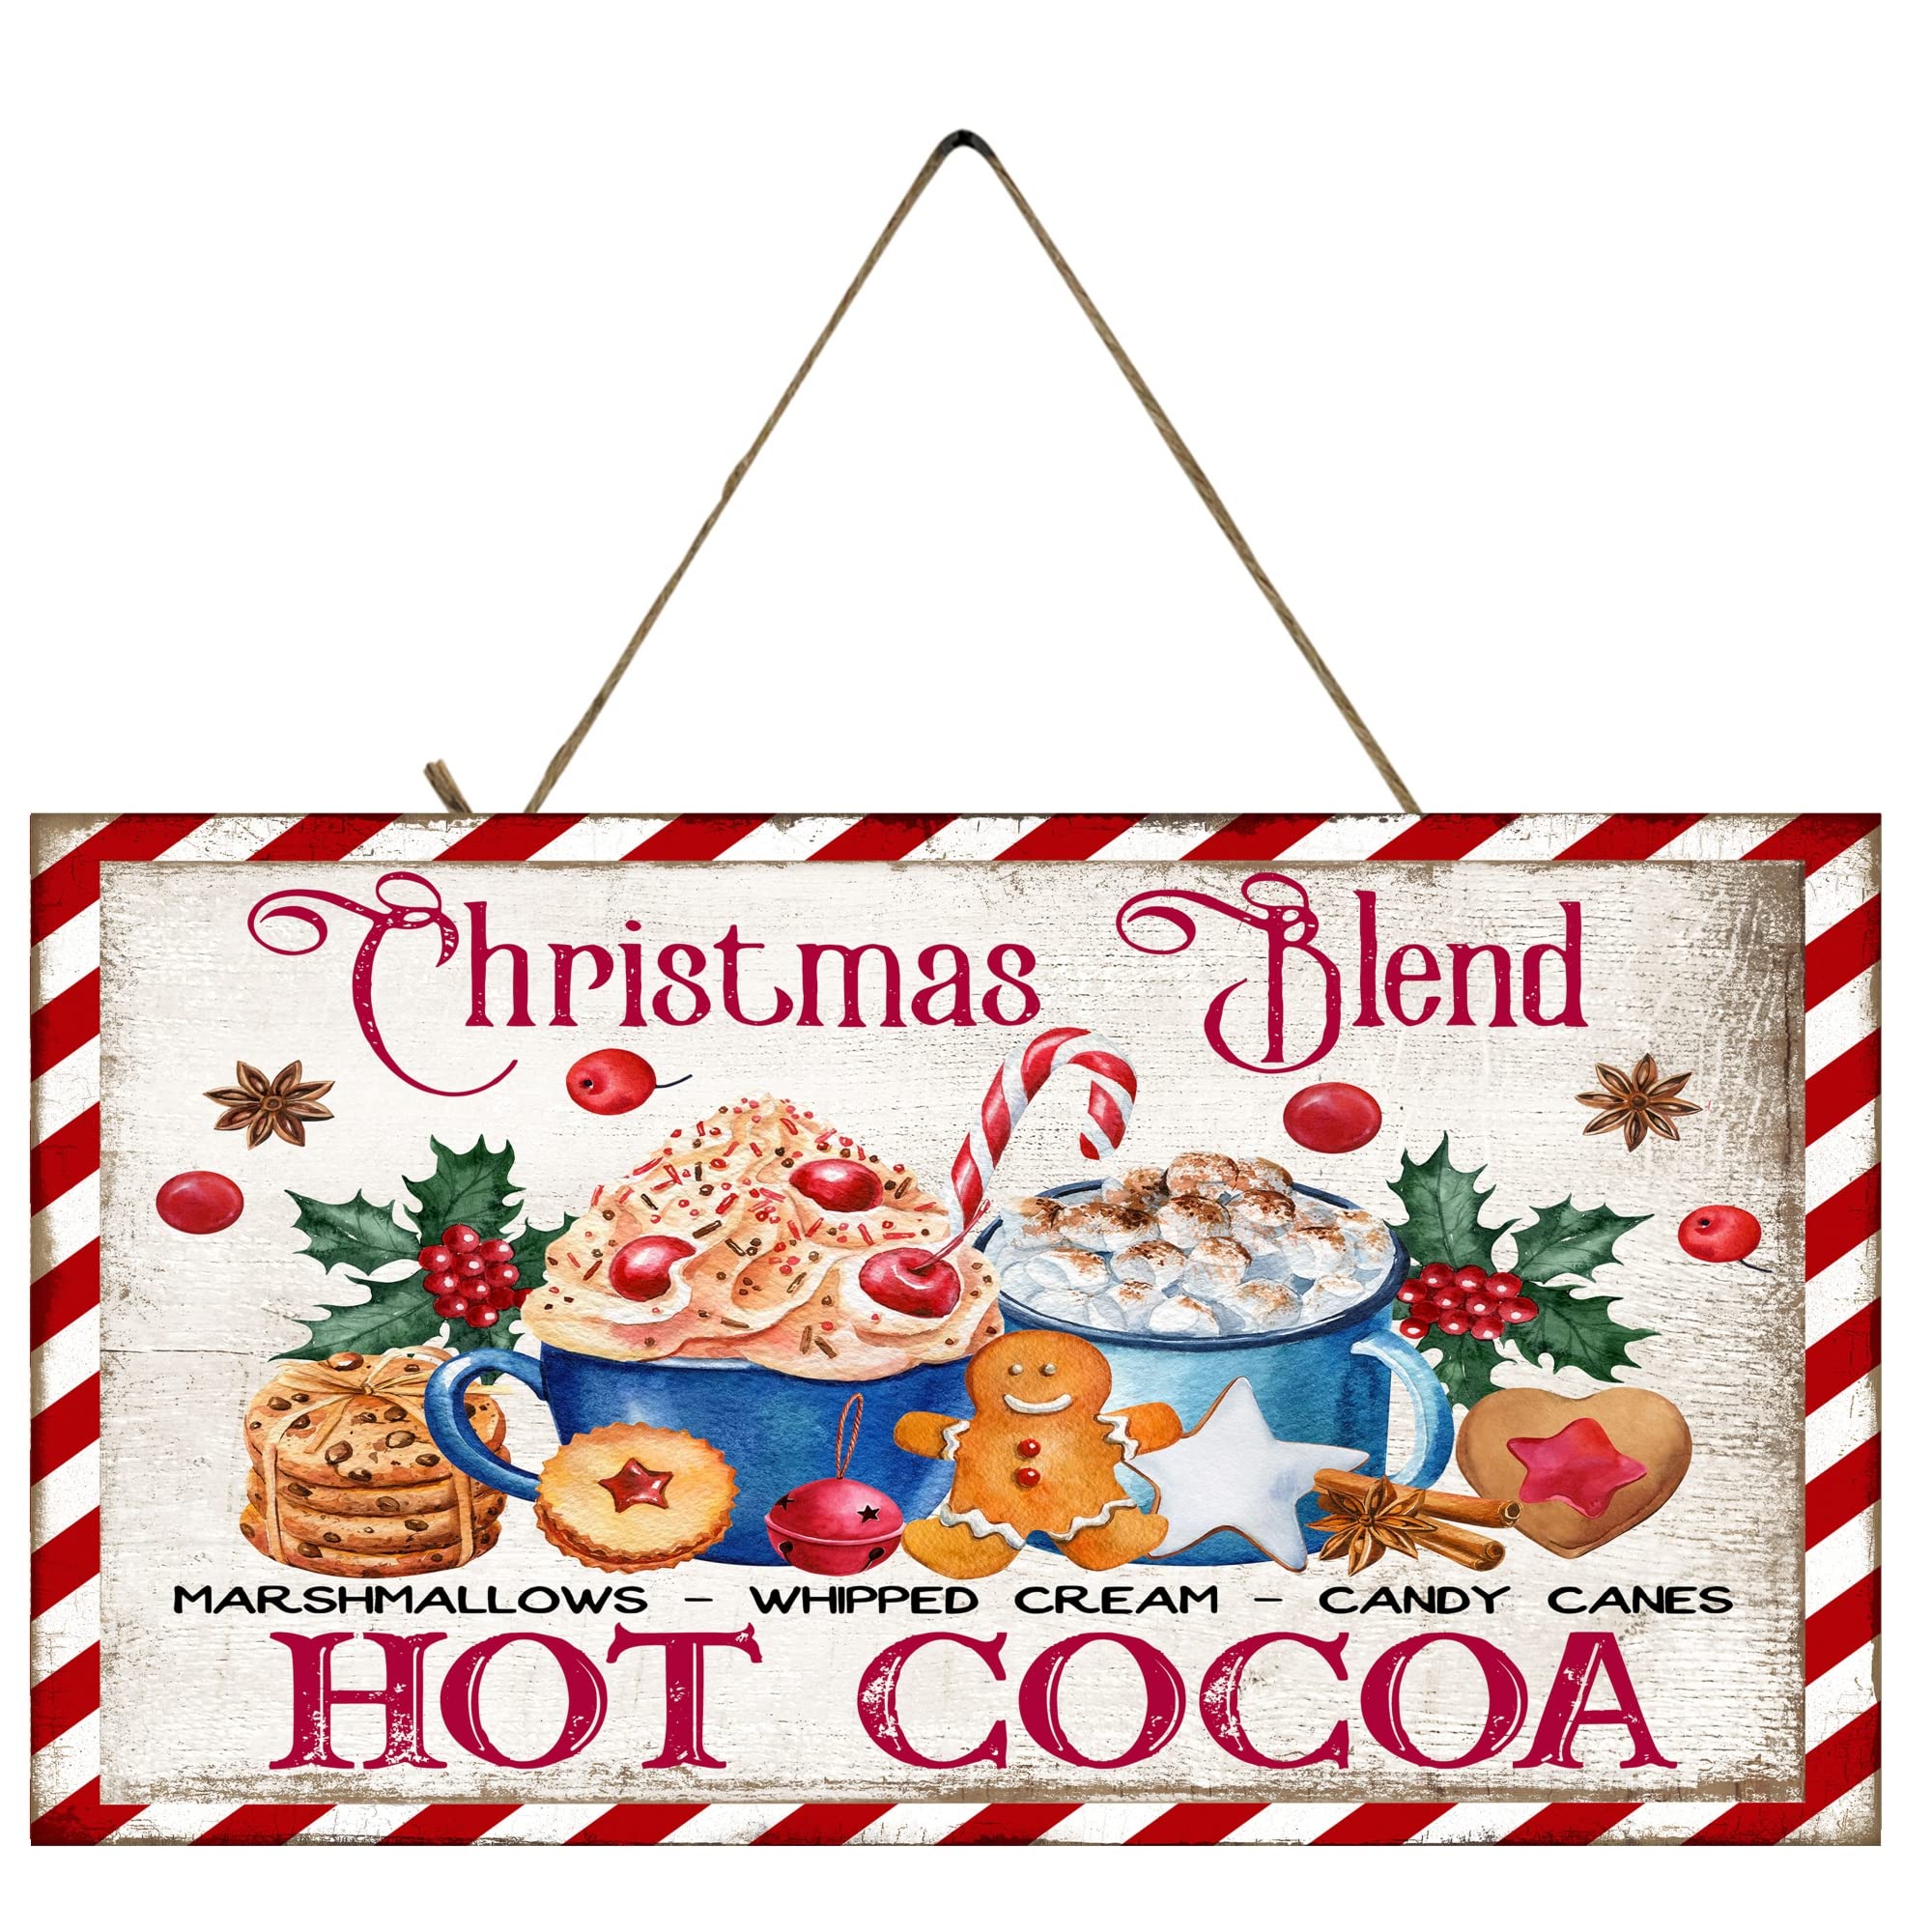 Twisted R Design Farmhouse christmas Decor Hanging Wood Wall Sign (christmas Blend Hot cocoa christmas Sign)